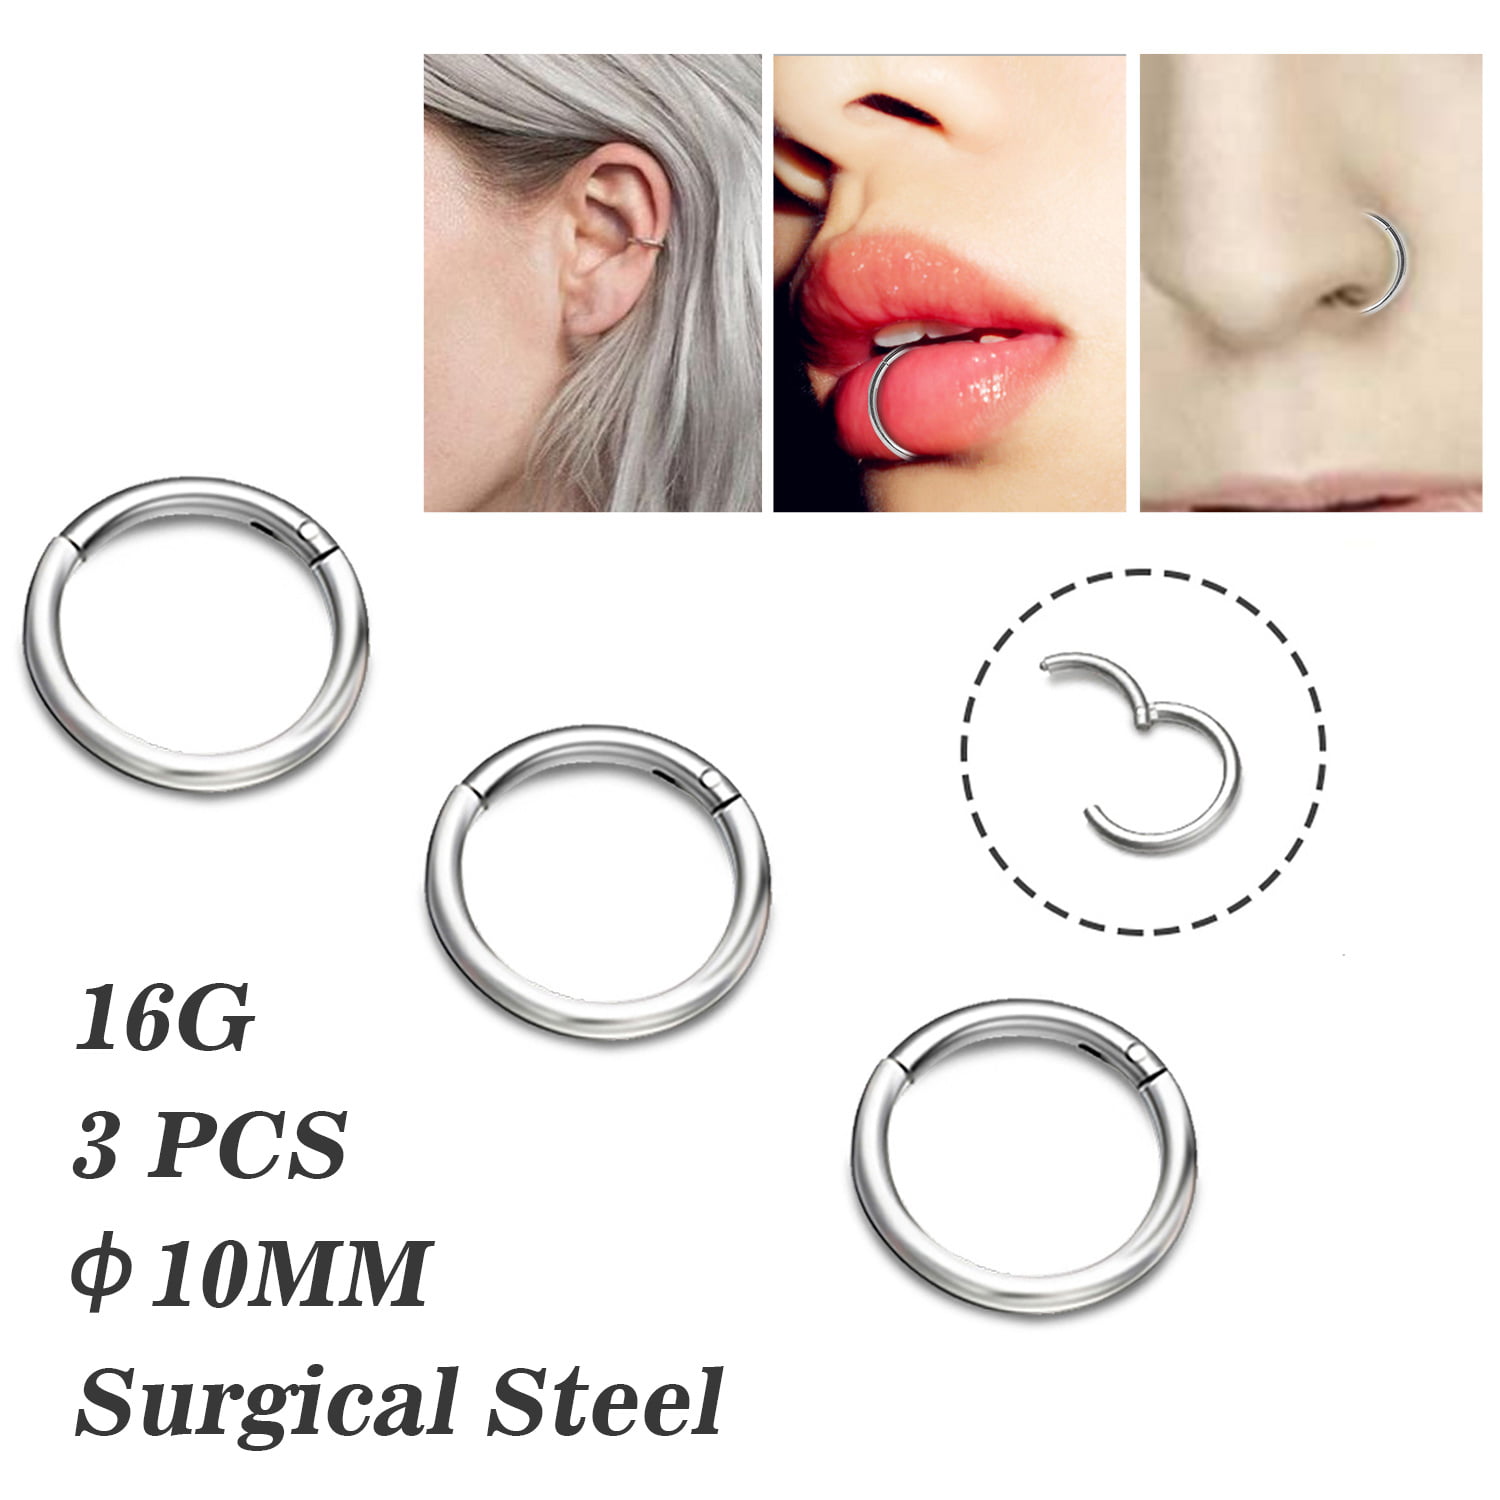 FORYOU FASHION Surgical Steel 16G Multi-Functional Lip/Nose/Nipple/Eyebrown Captive Hoop Ring Barbell Tragus Cartilage Stud Earrings 6mm 